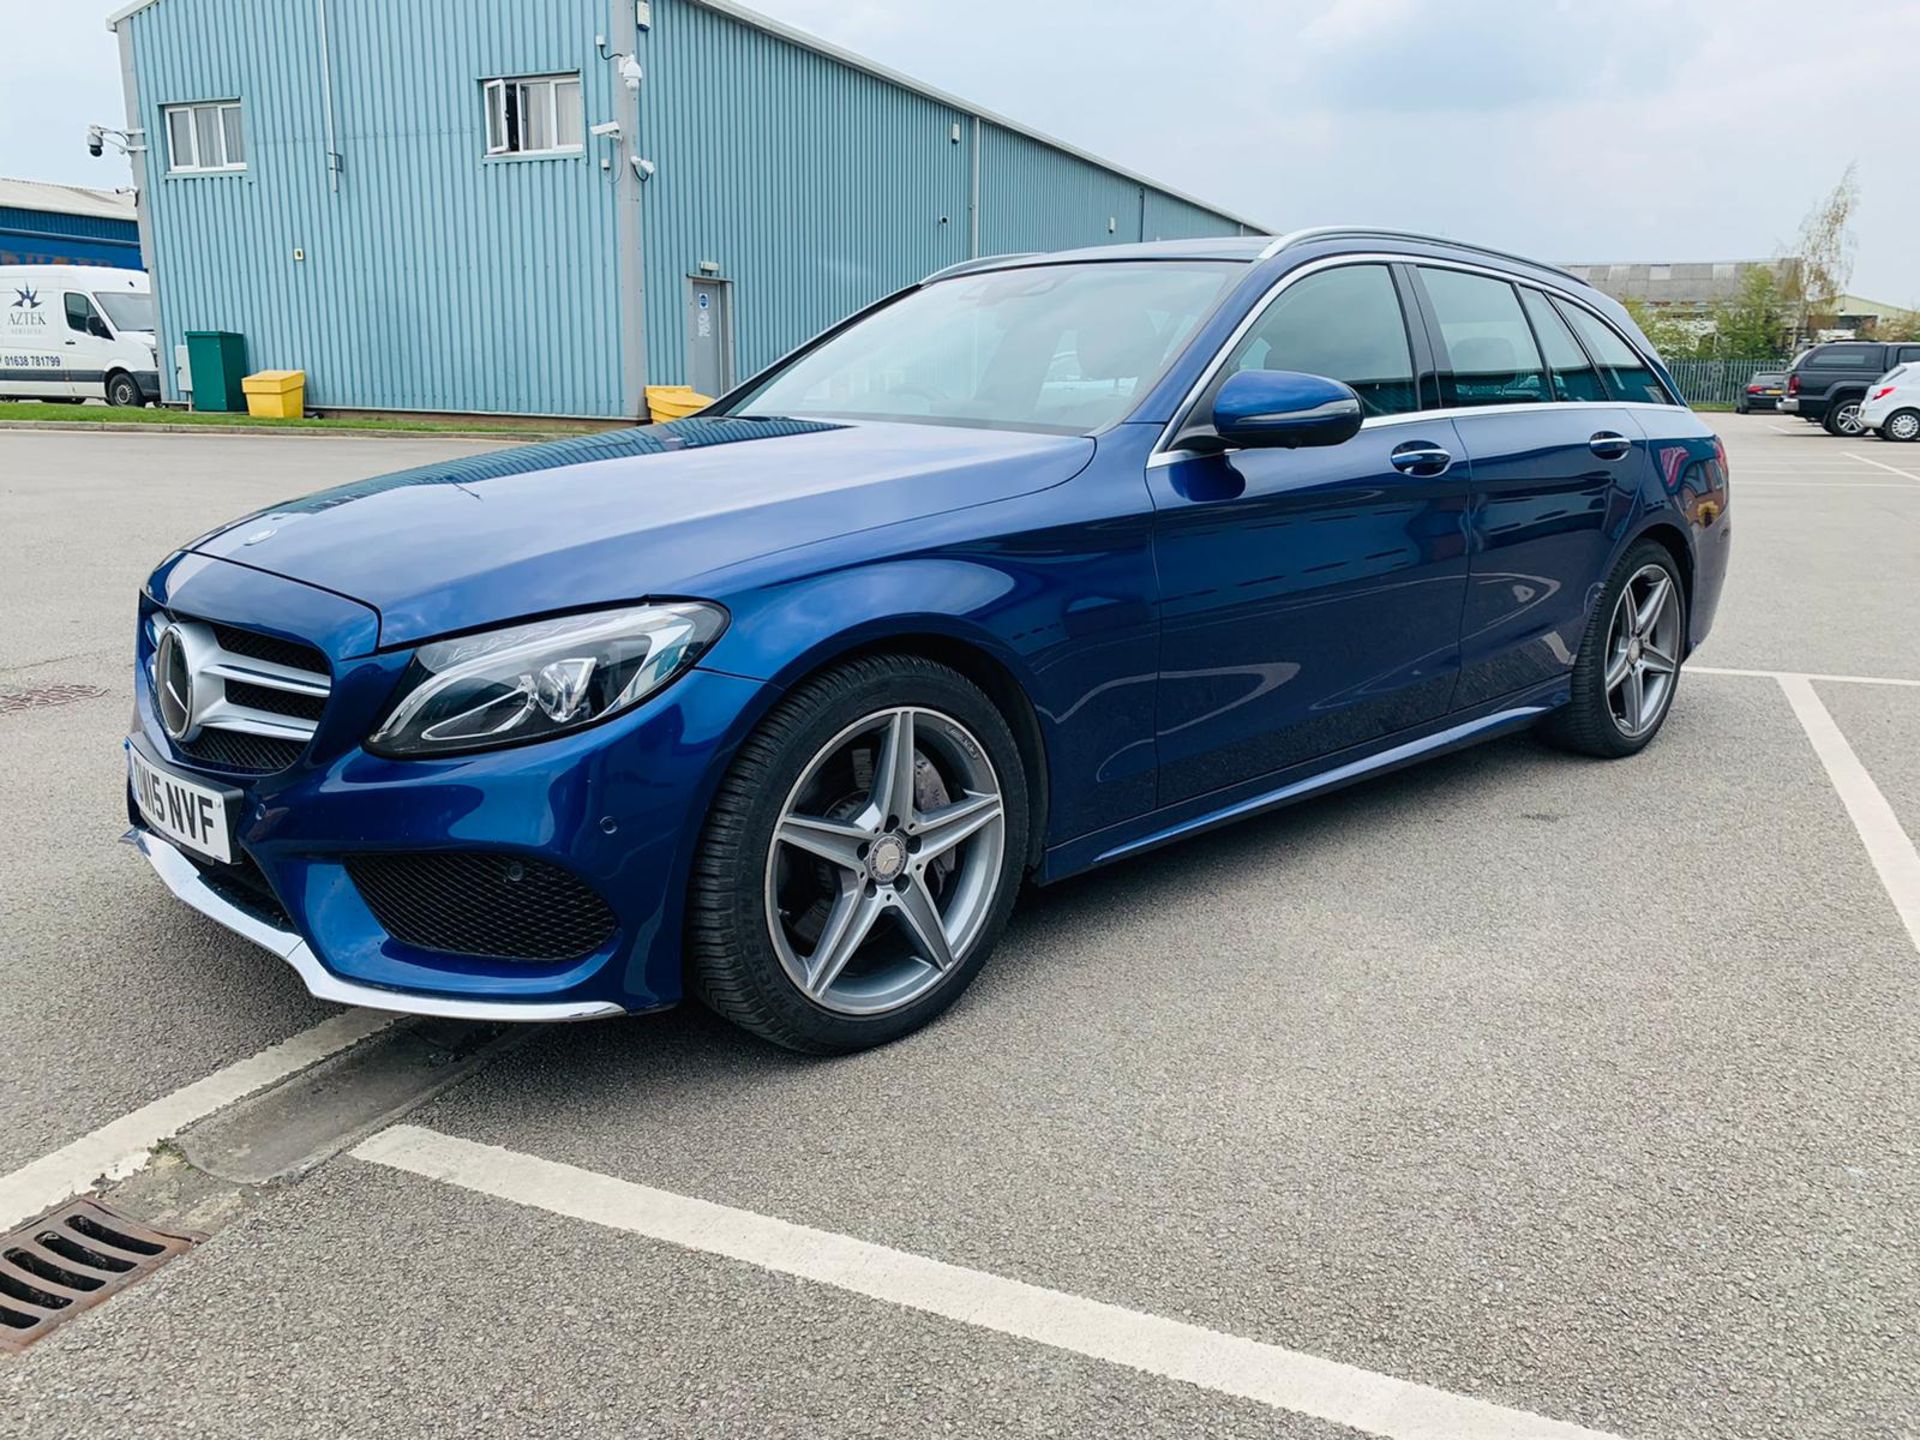 Mercedes C300 AMG Line Premium Diesel/Electric Hybrid Estate Auto - 2015 15 Reg - 1 Owner From New - Image 2 of 27